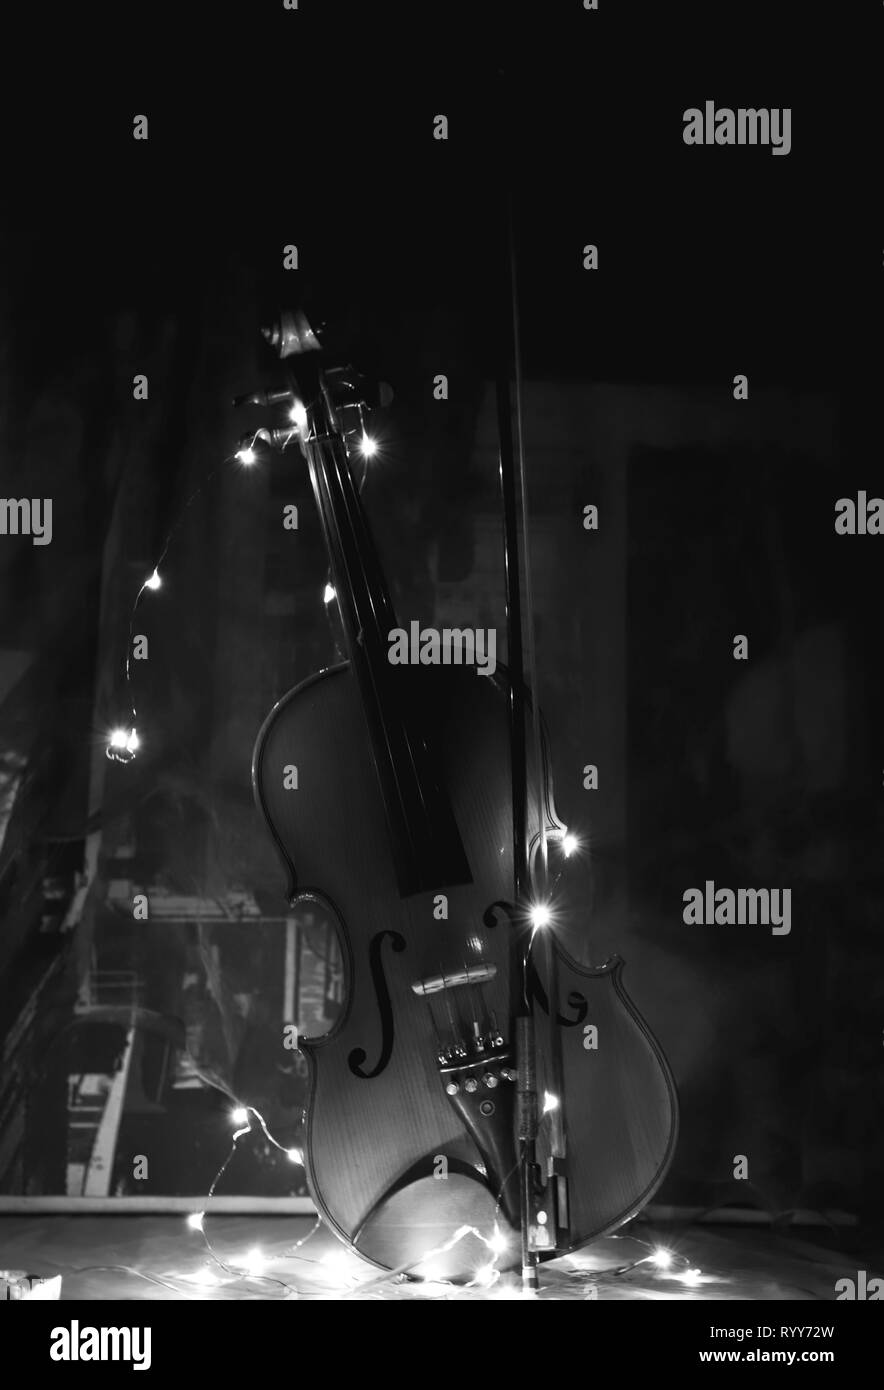 Violin in black and white background with led lights Stock Photo